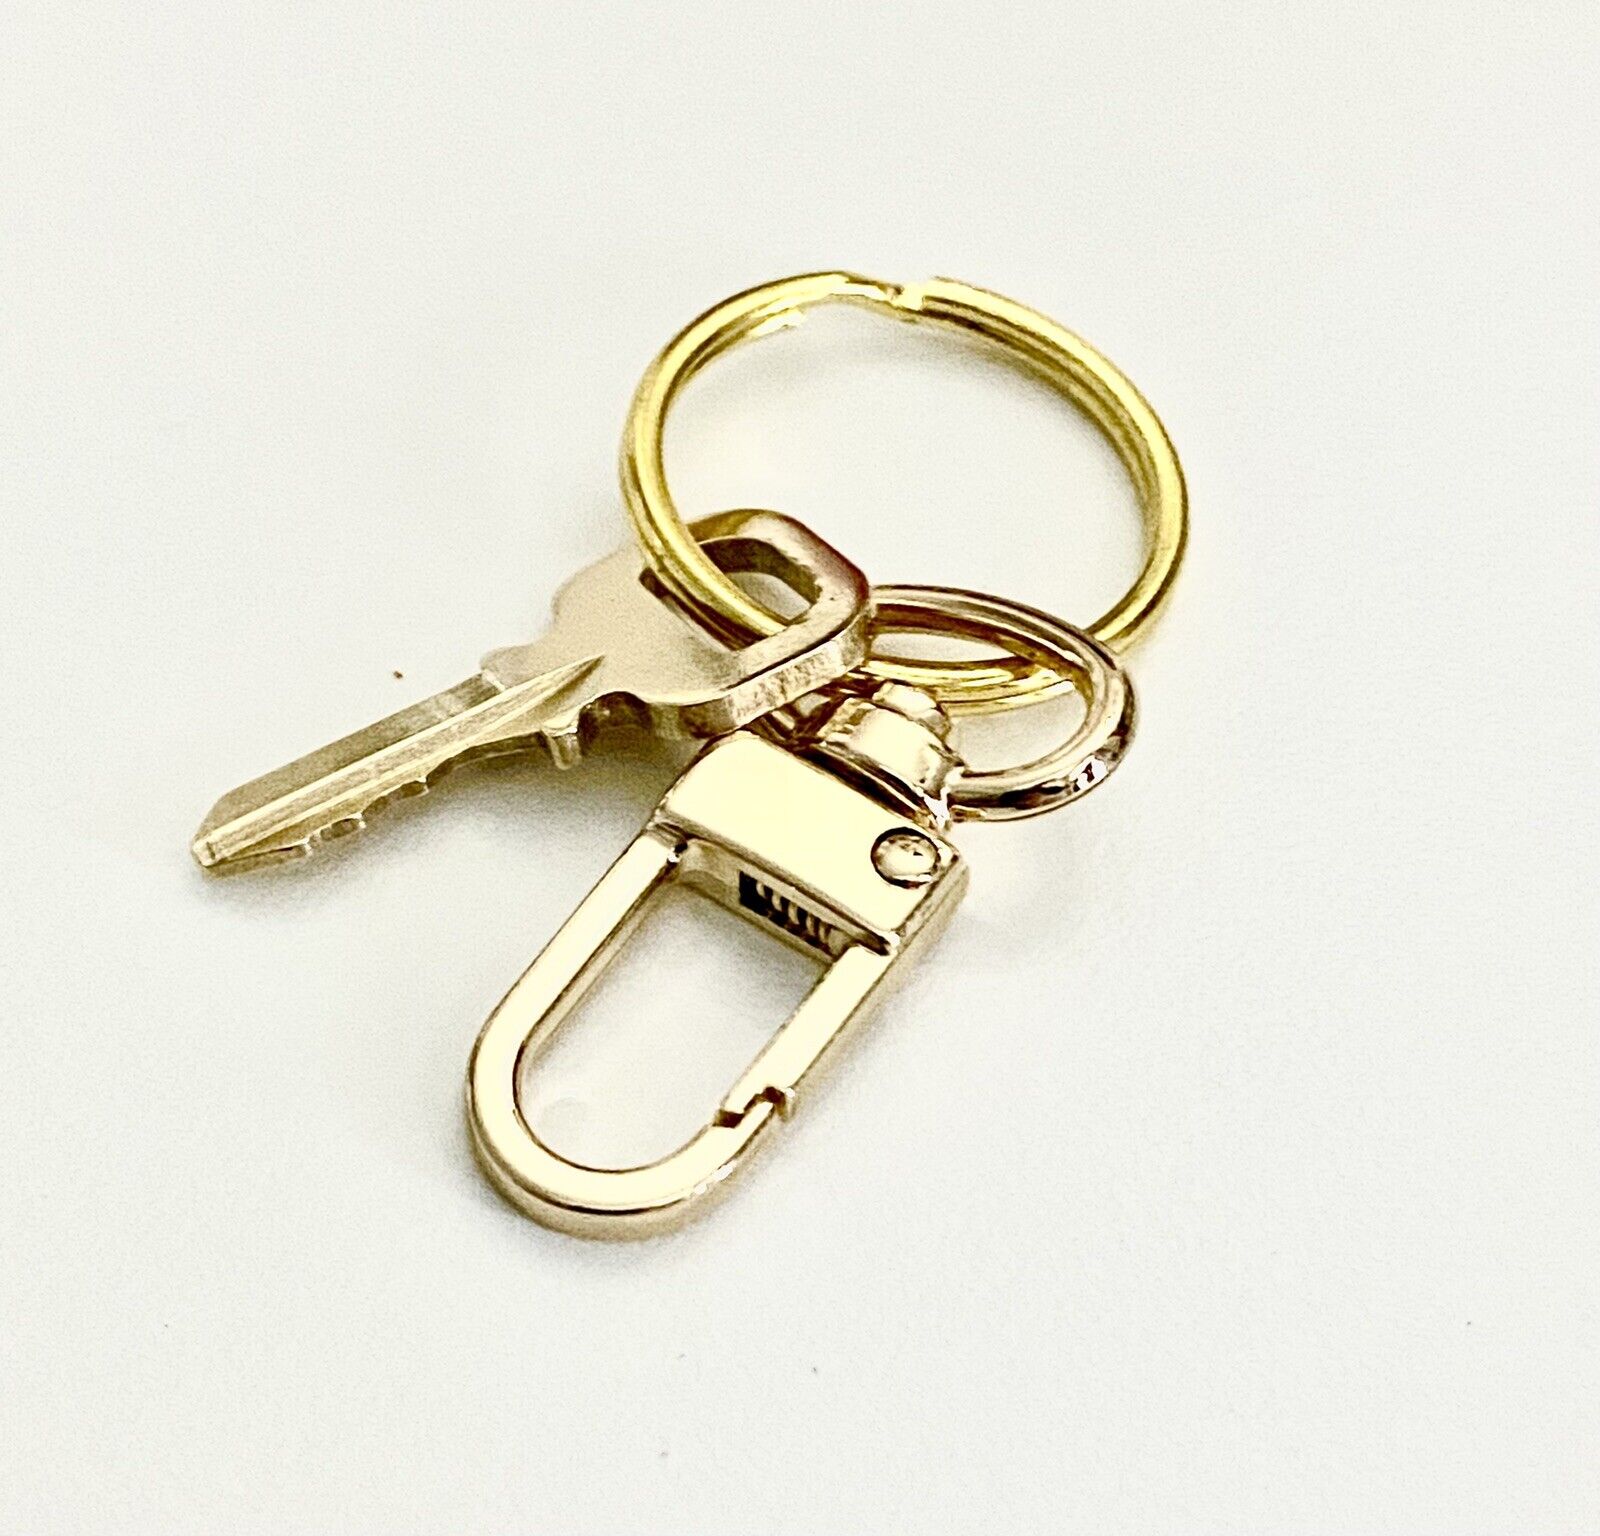 Vintage Gold Brass Lock and Key Set #319 by Louis Vuitton